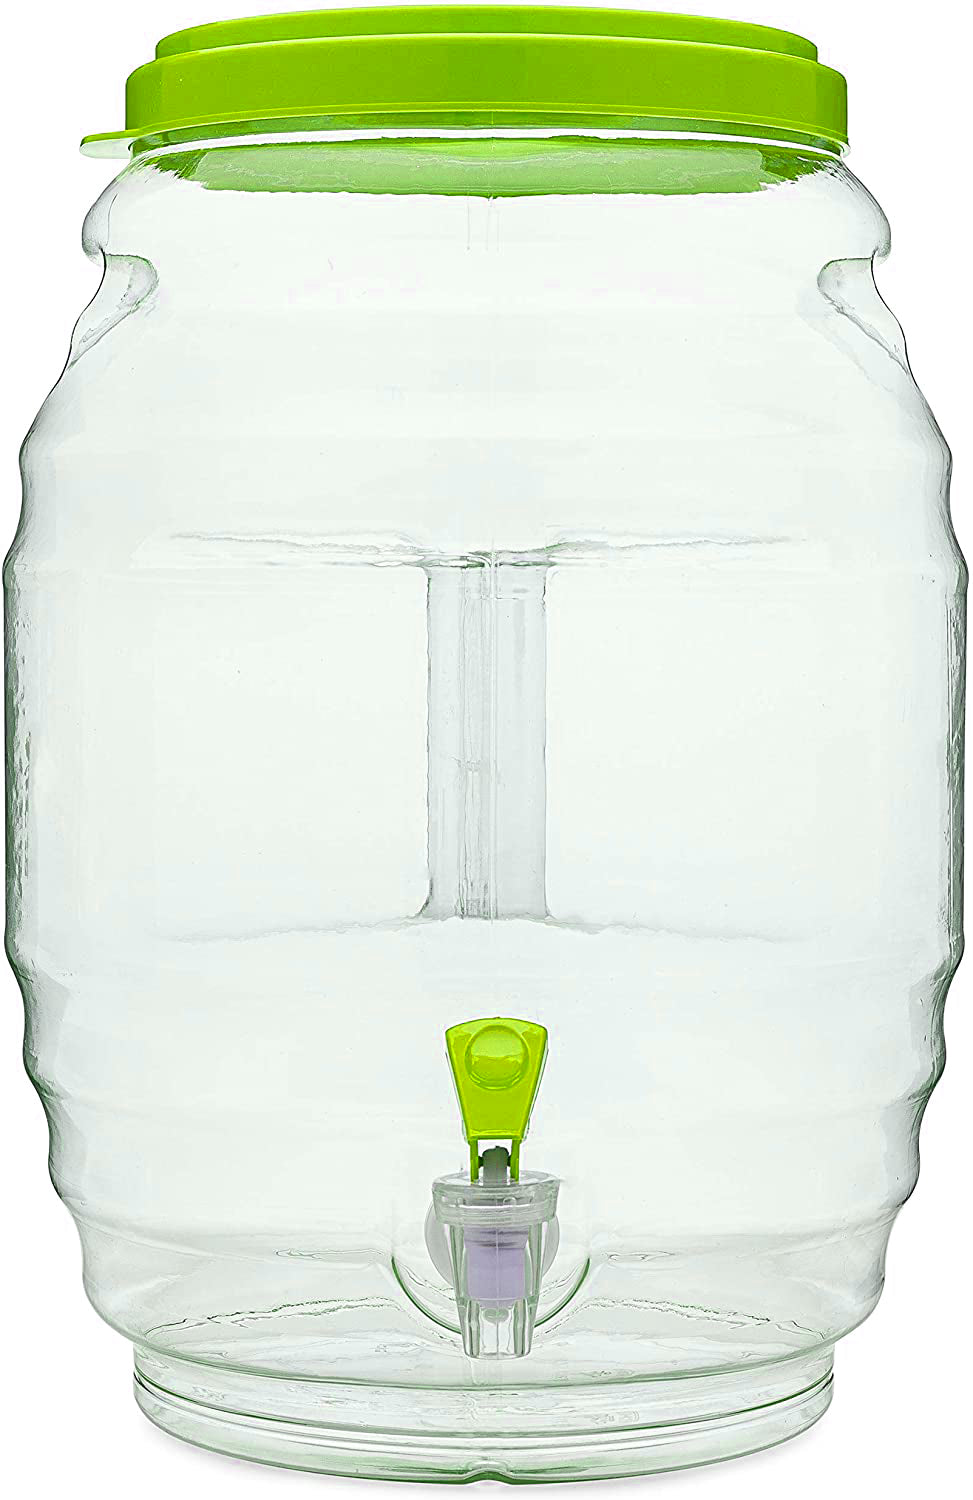 5 GAL Green Jug Water Dispenser With Lid & Spout